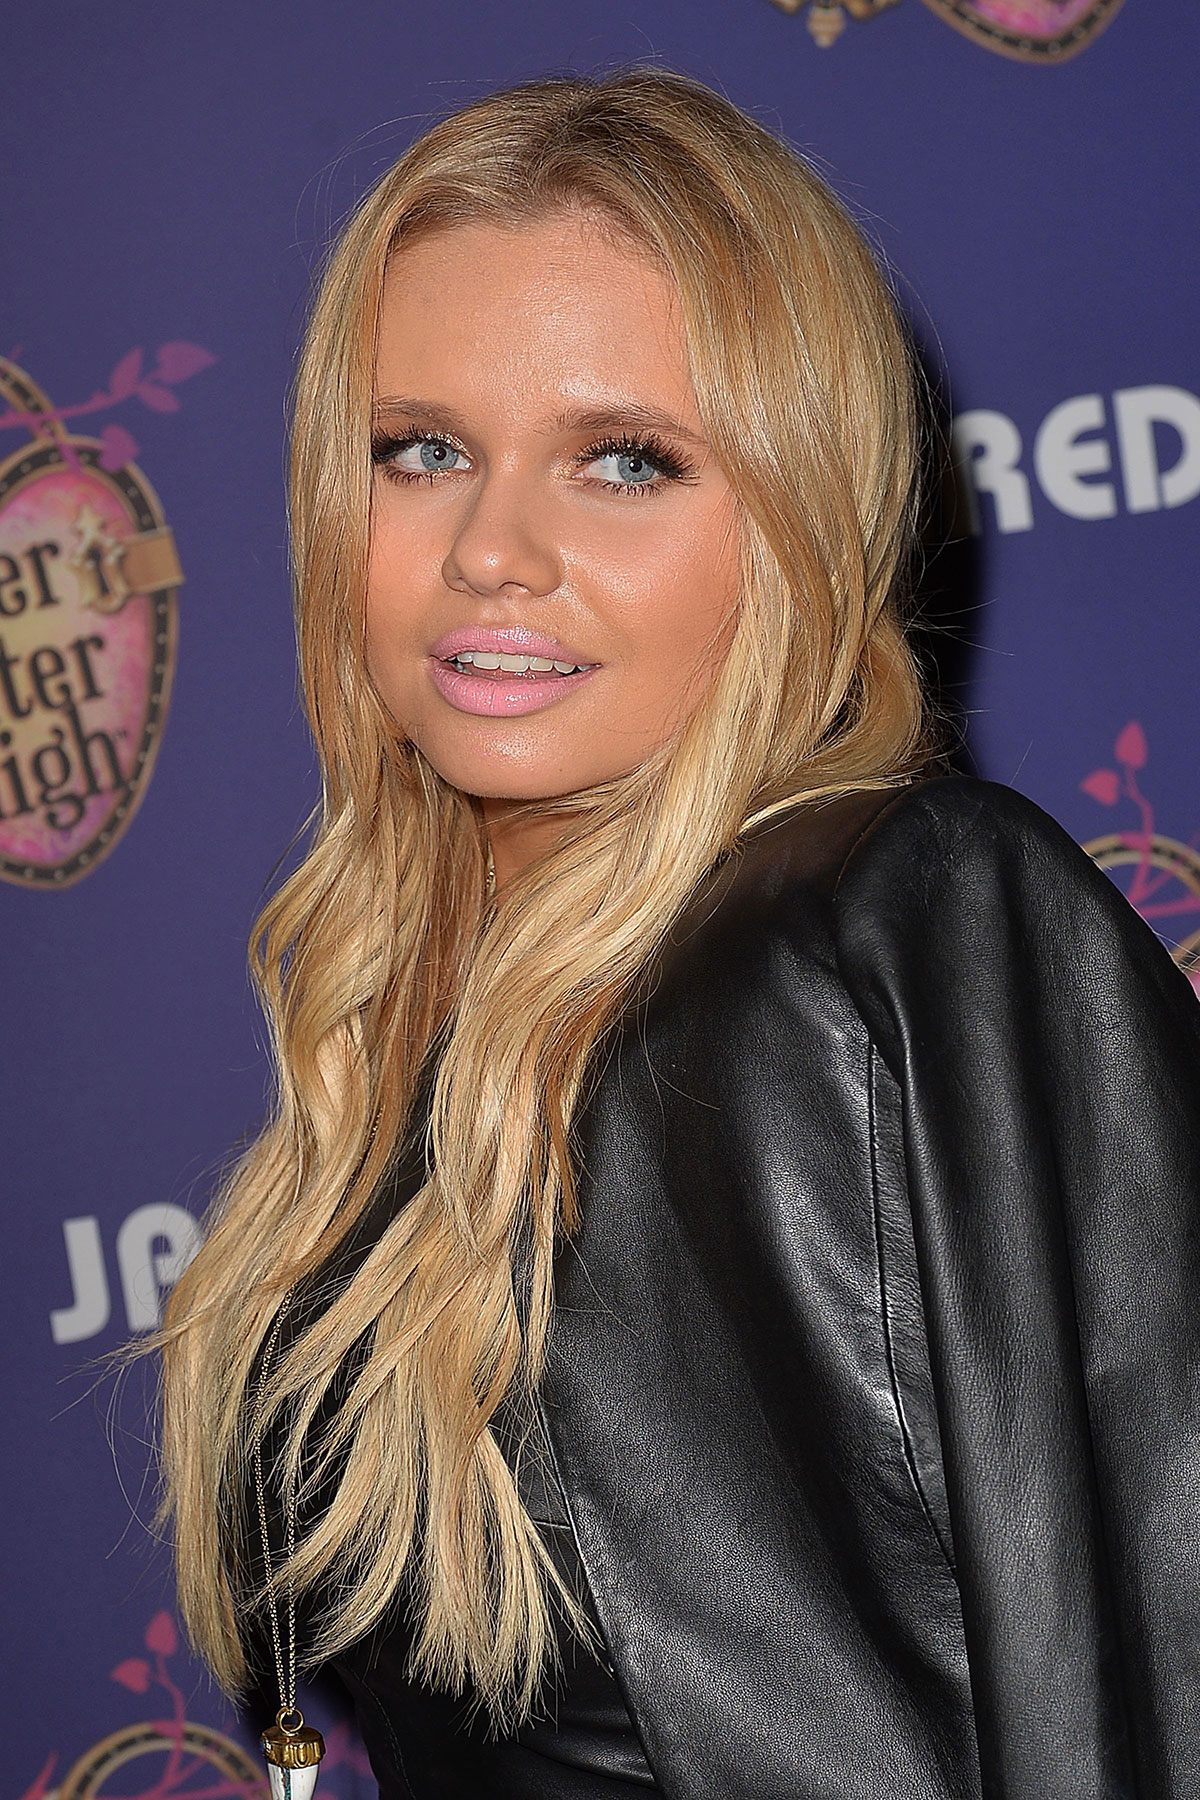 Alli Simpson at Just Jared’s Homecoming Dance